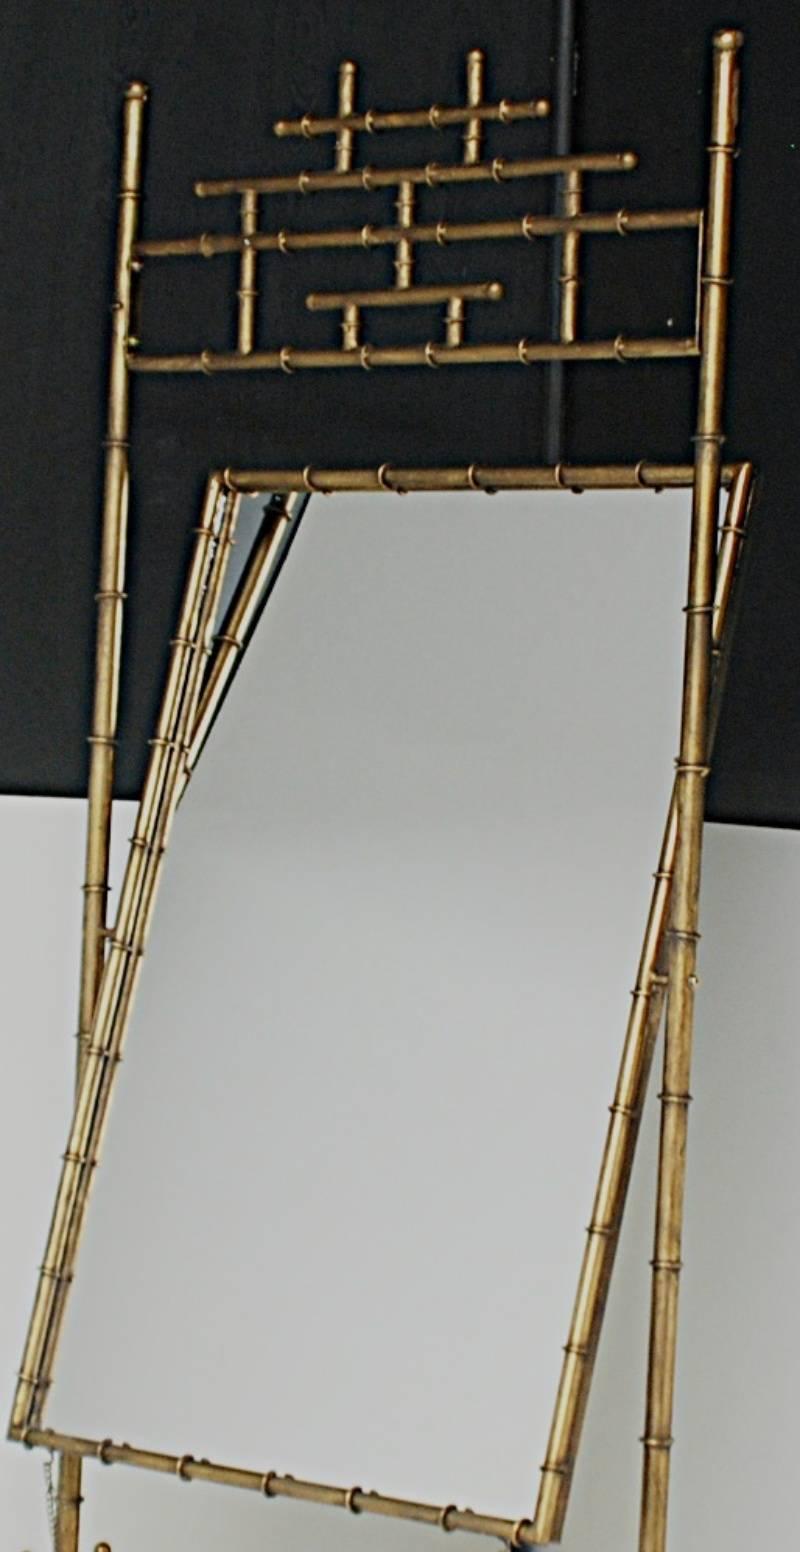 Hollywood Regency style gilded effect faux bamboo cheval mirror with a natural clear mirror insert.